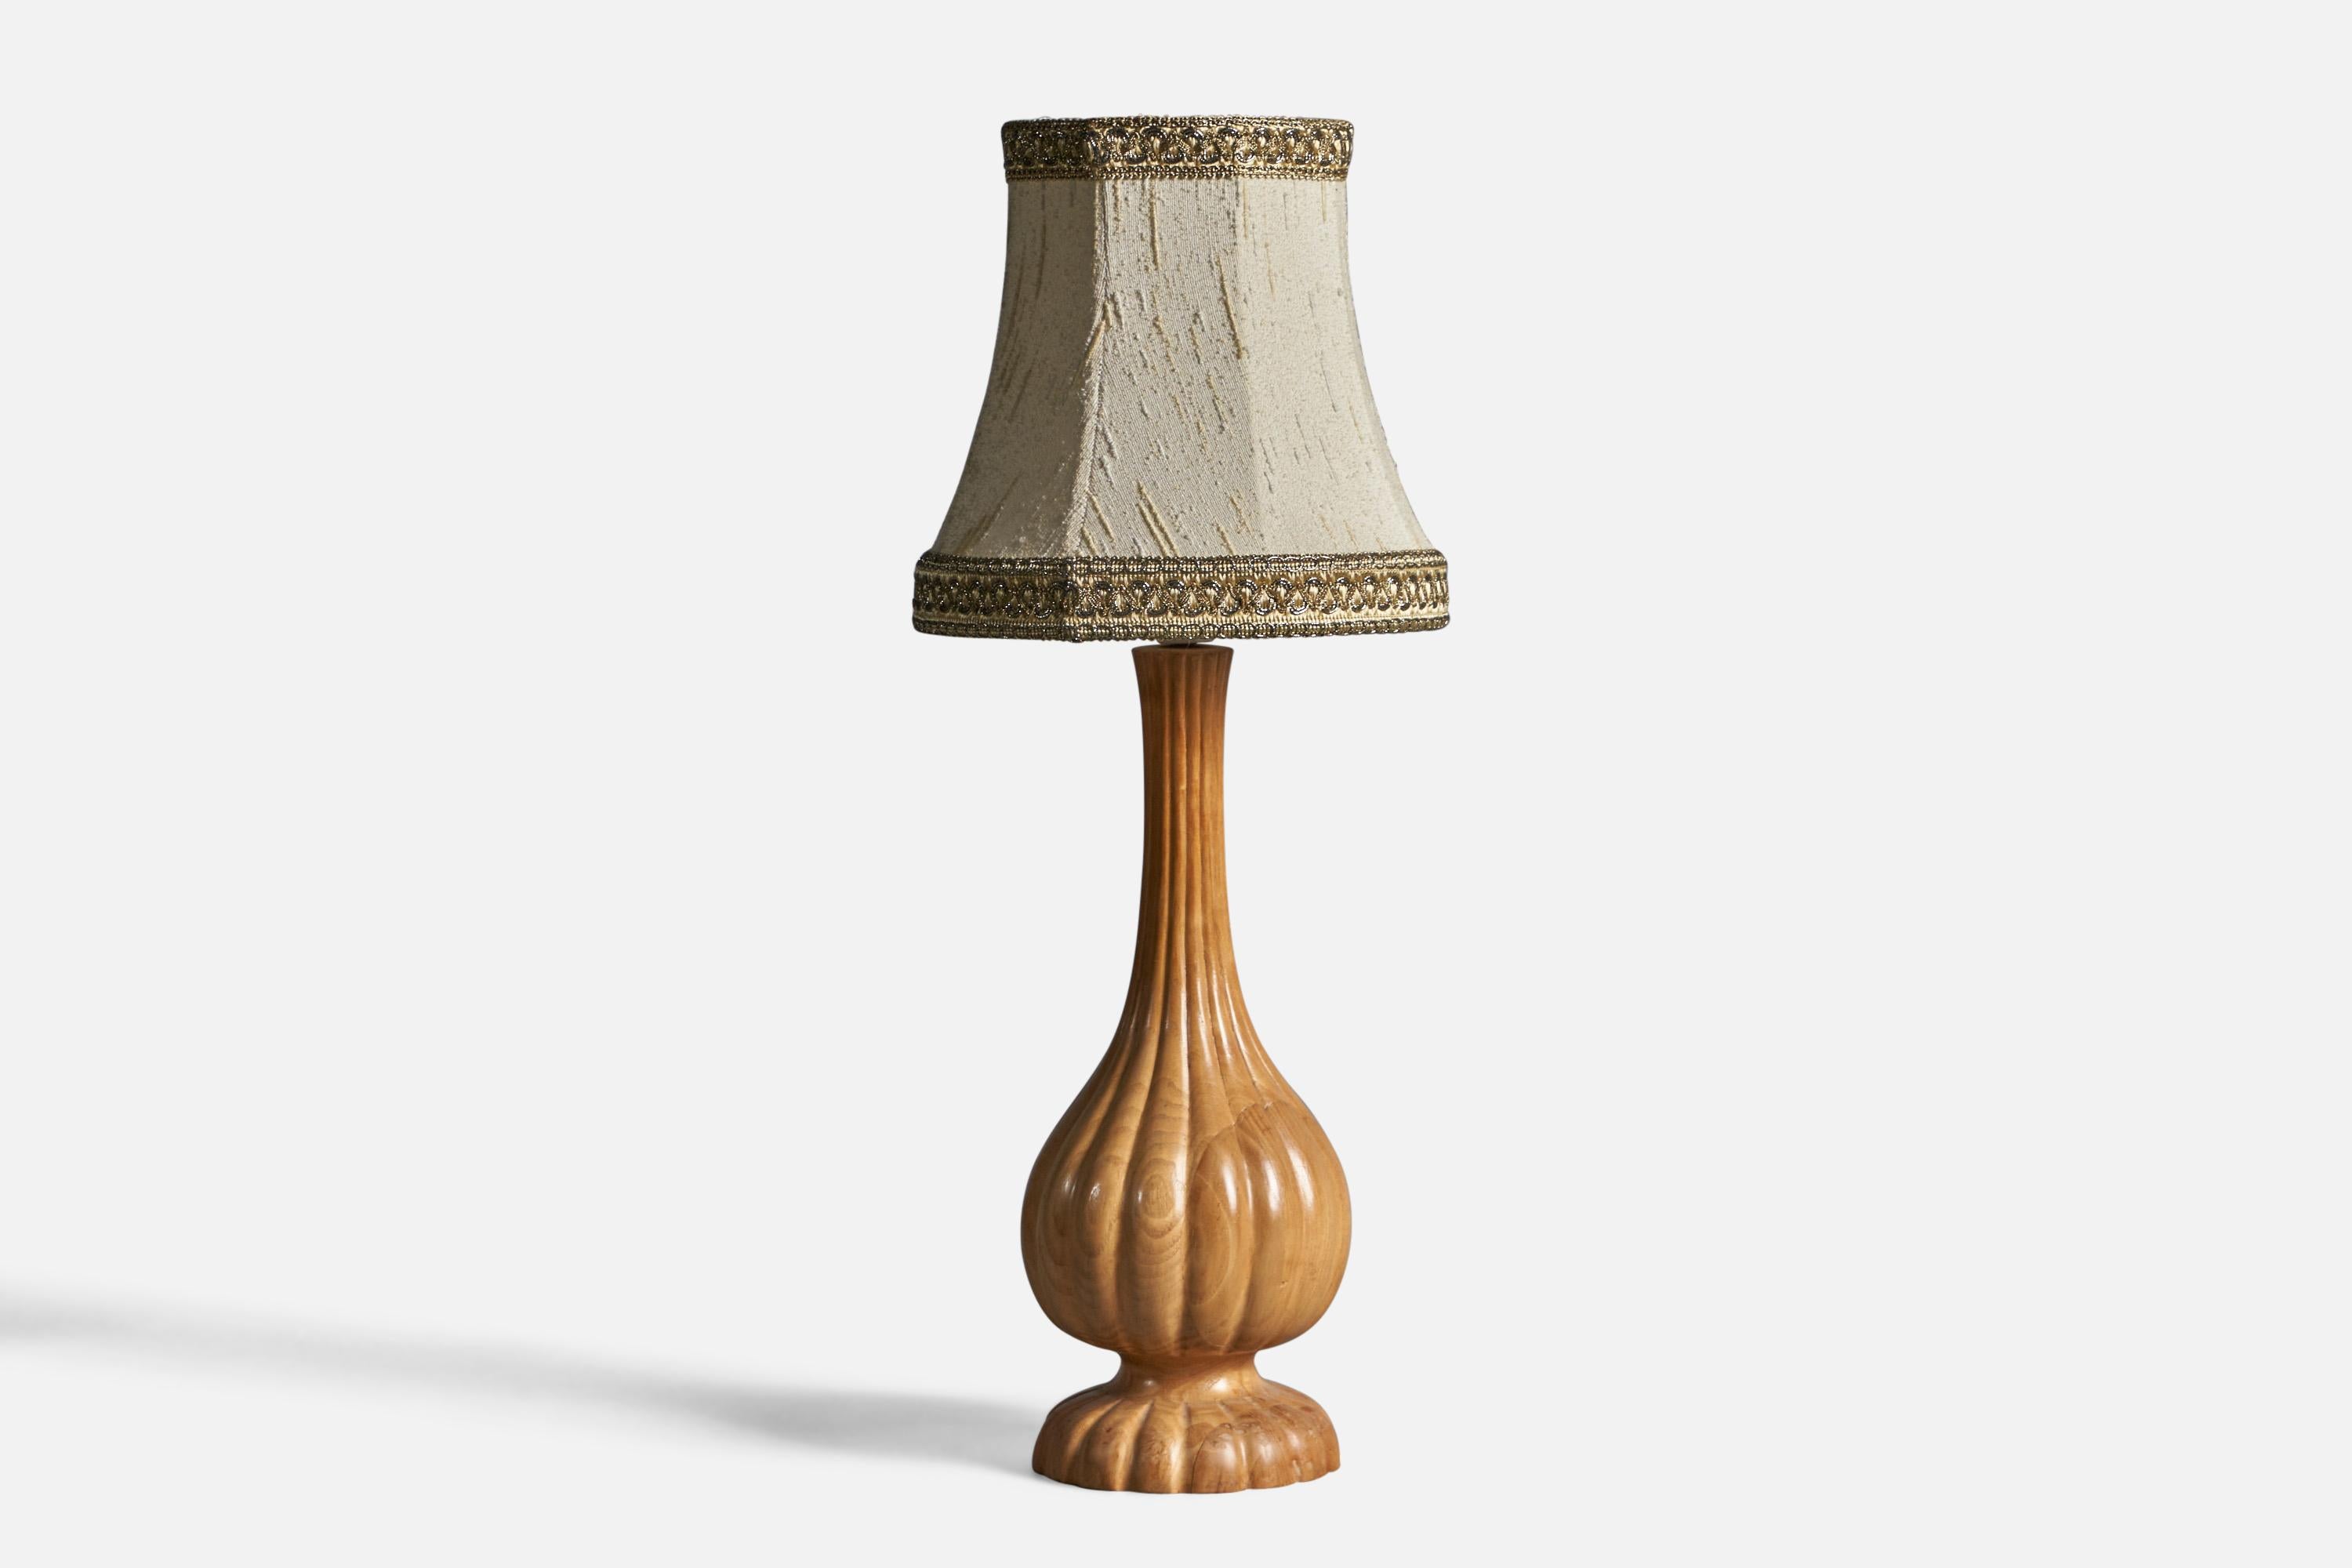 A fluted oak and beige fabric table lamp, designed and produced in Sweden, c. 1960s.

Overall Dimensions (inches): 20.5